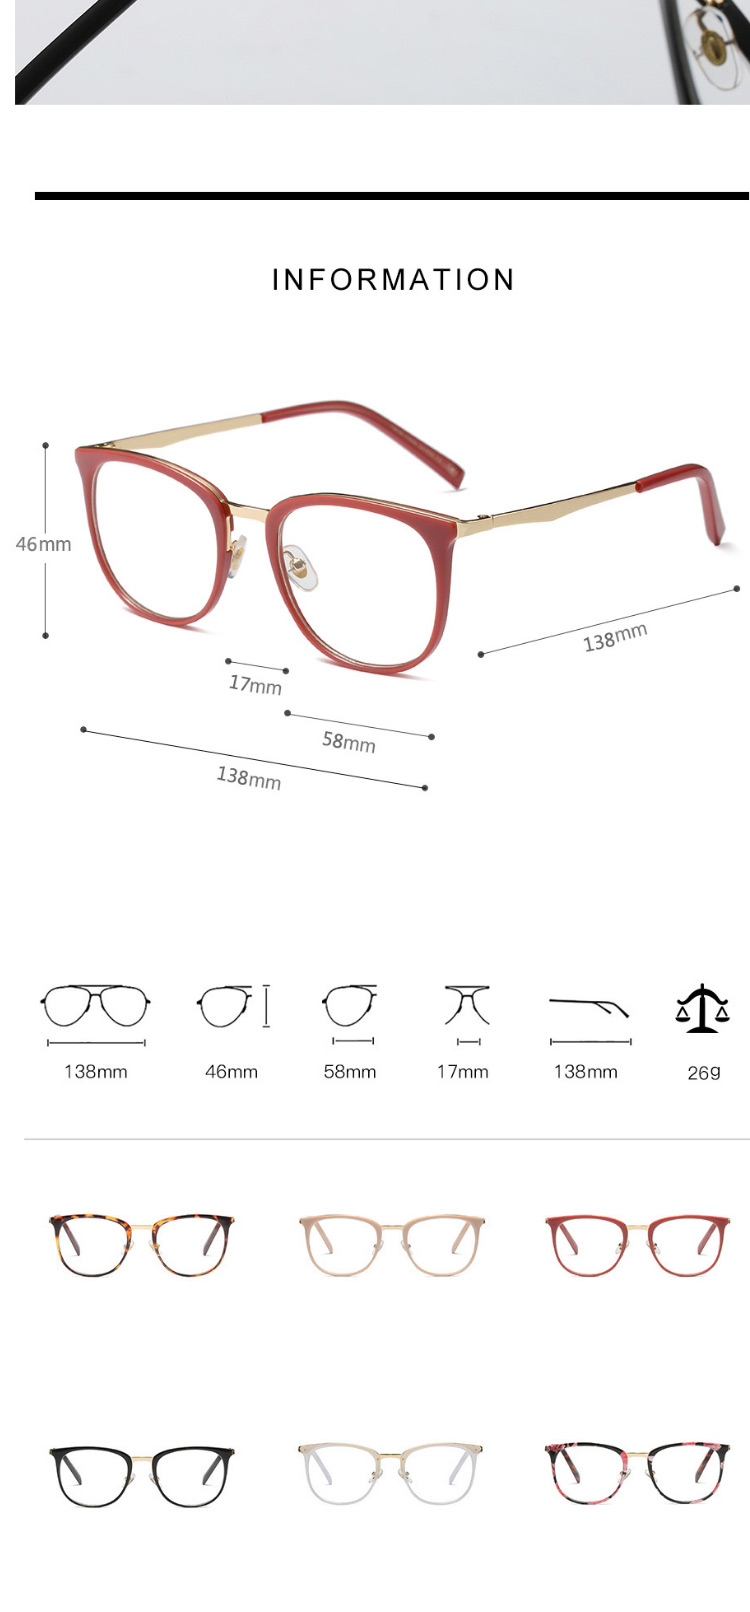 Fashion C4 Bright Black/transparent Ultra-light Can Be Equipped With Myopia Round Frame,Fashion Glasses